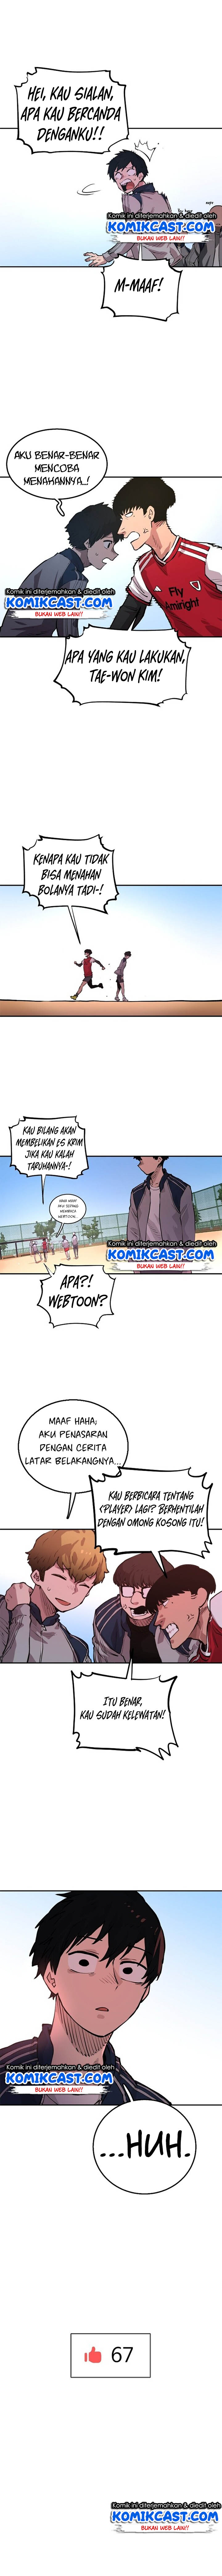 Player Chapter 01 12